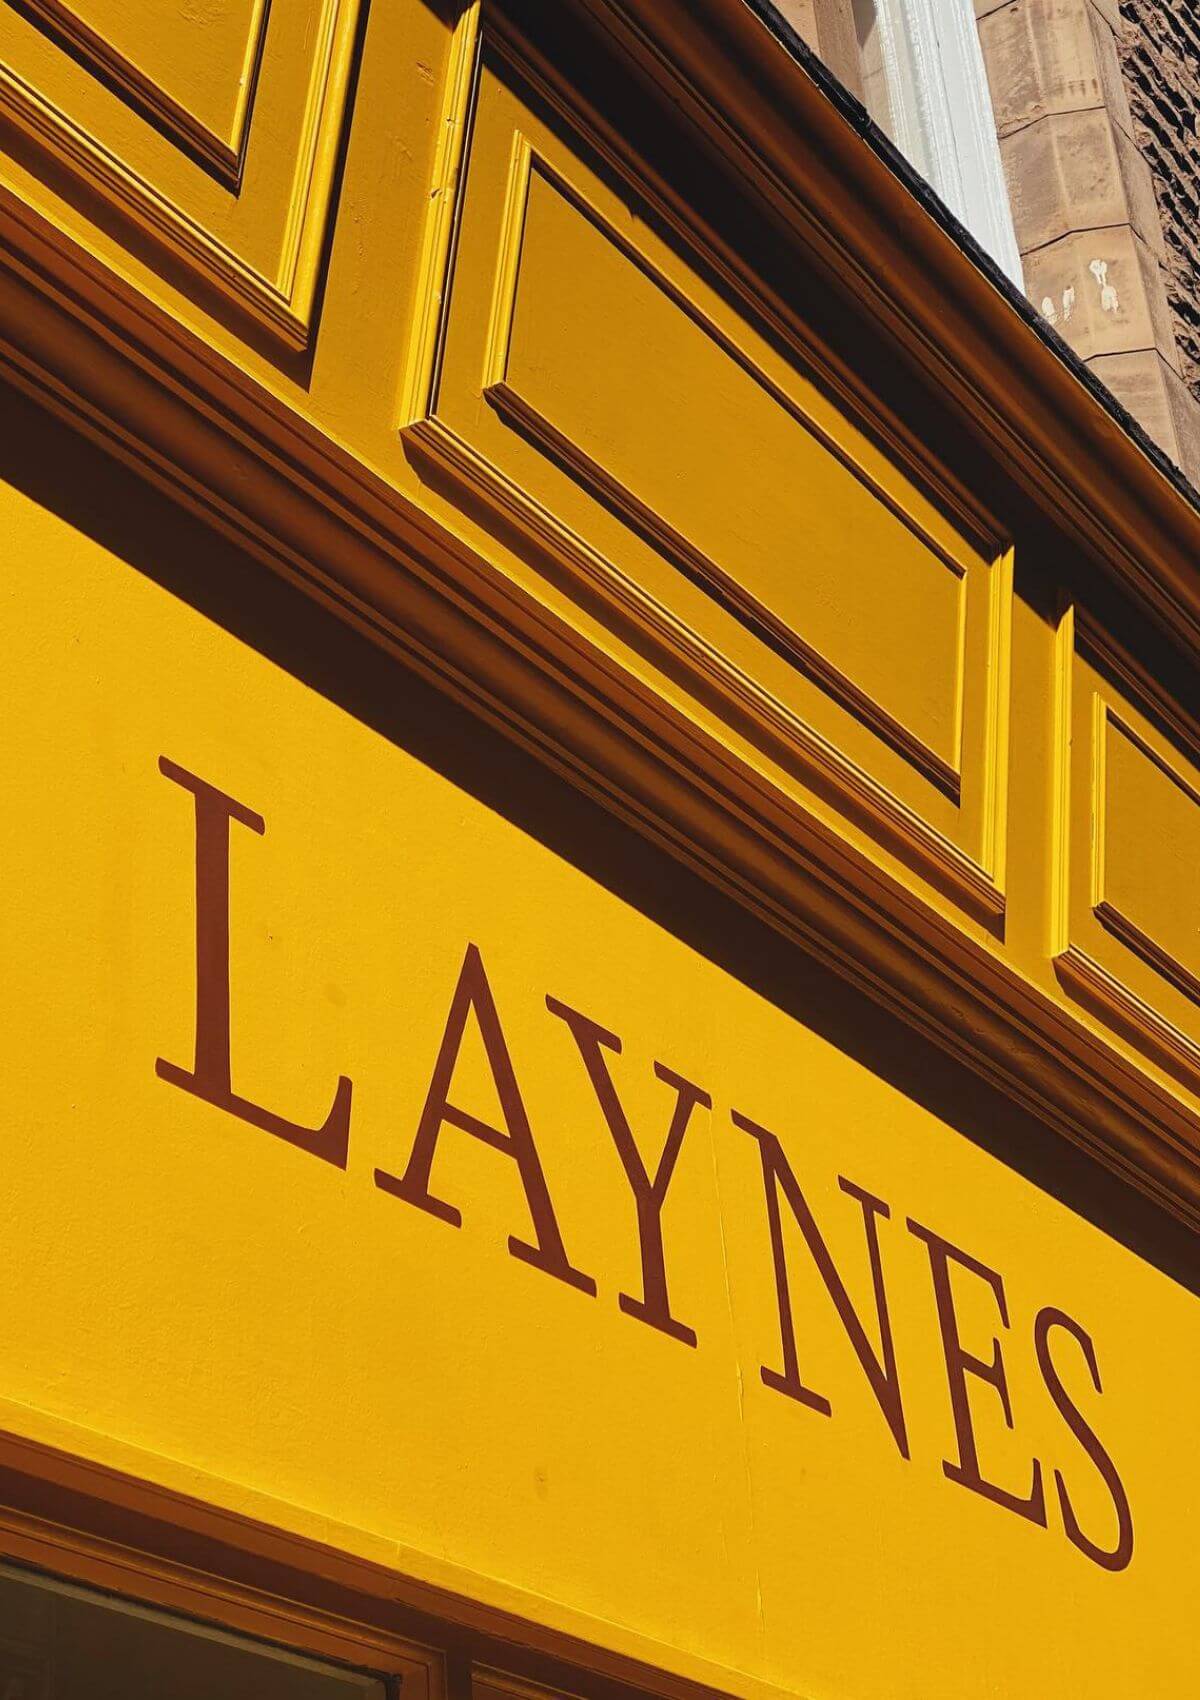 Take a break at Layne's Espresso on your day out in Leeds